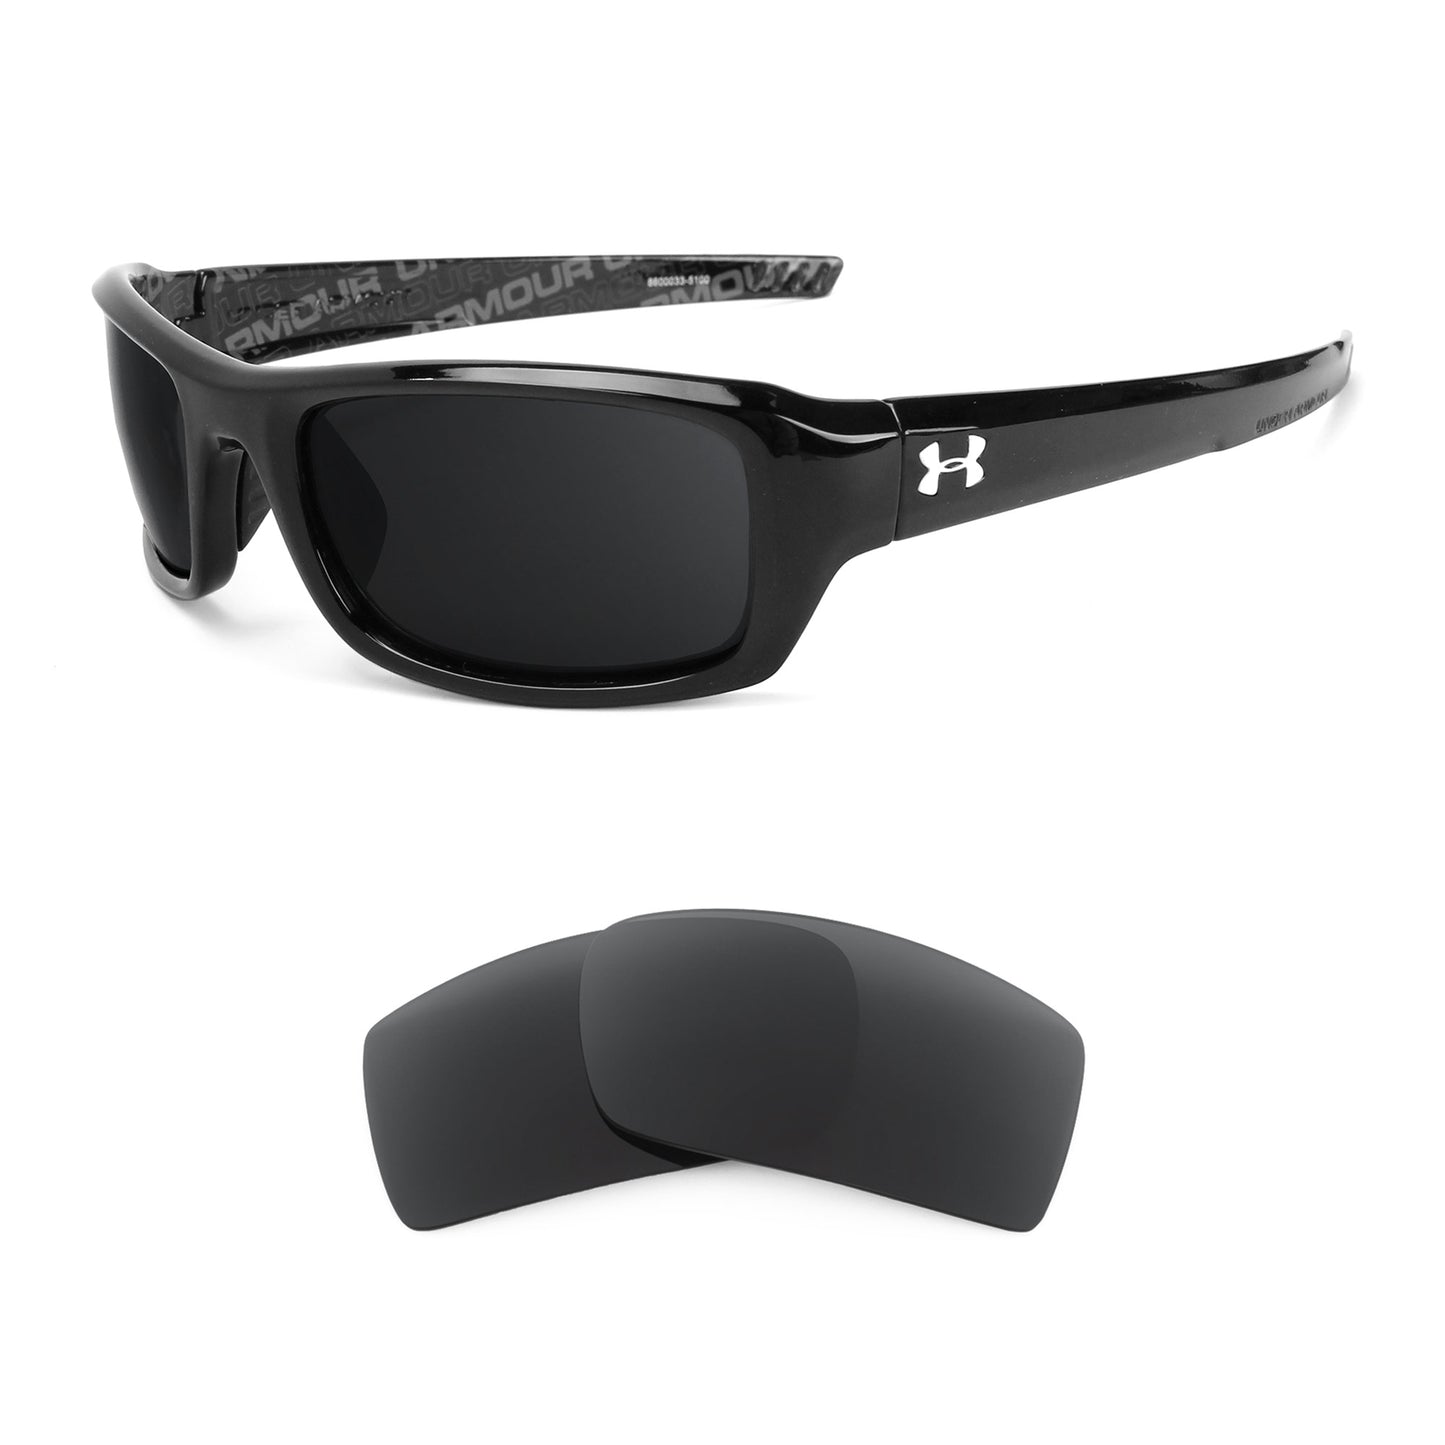 Under Armour Surge sunglasses with replacement lenses